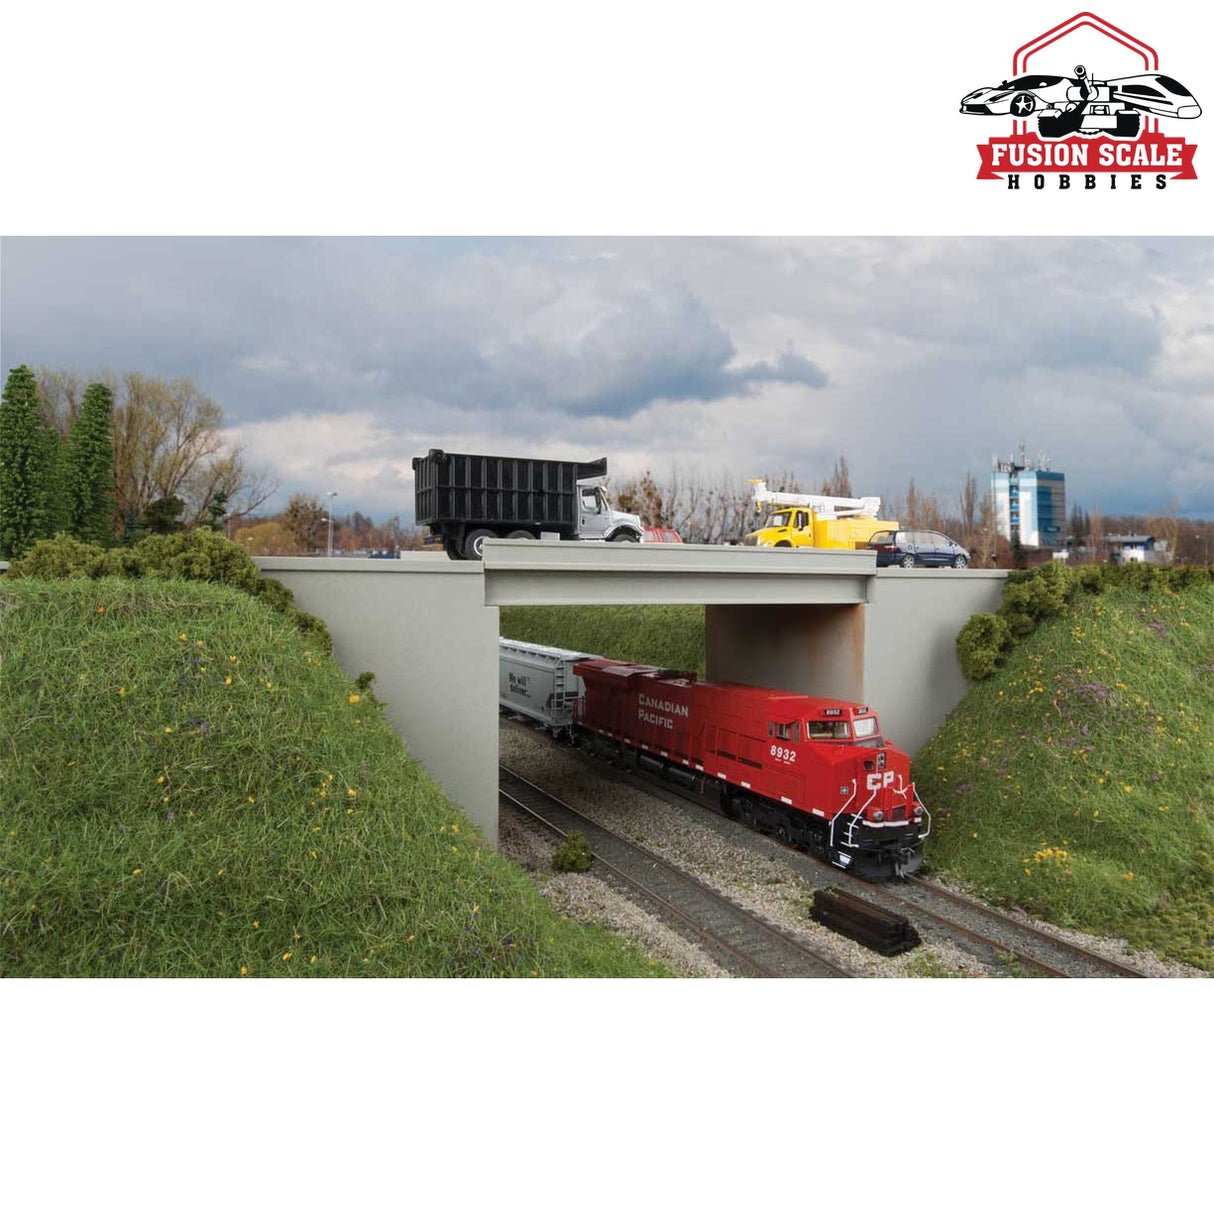 Walthers Cornerstone HO Scale Modern Concrete Highway Overpass Kit 1215/16 x 43/4" 32.9 x 12cm